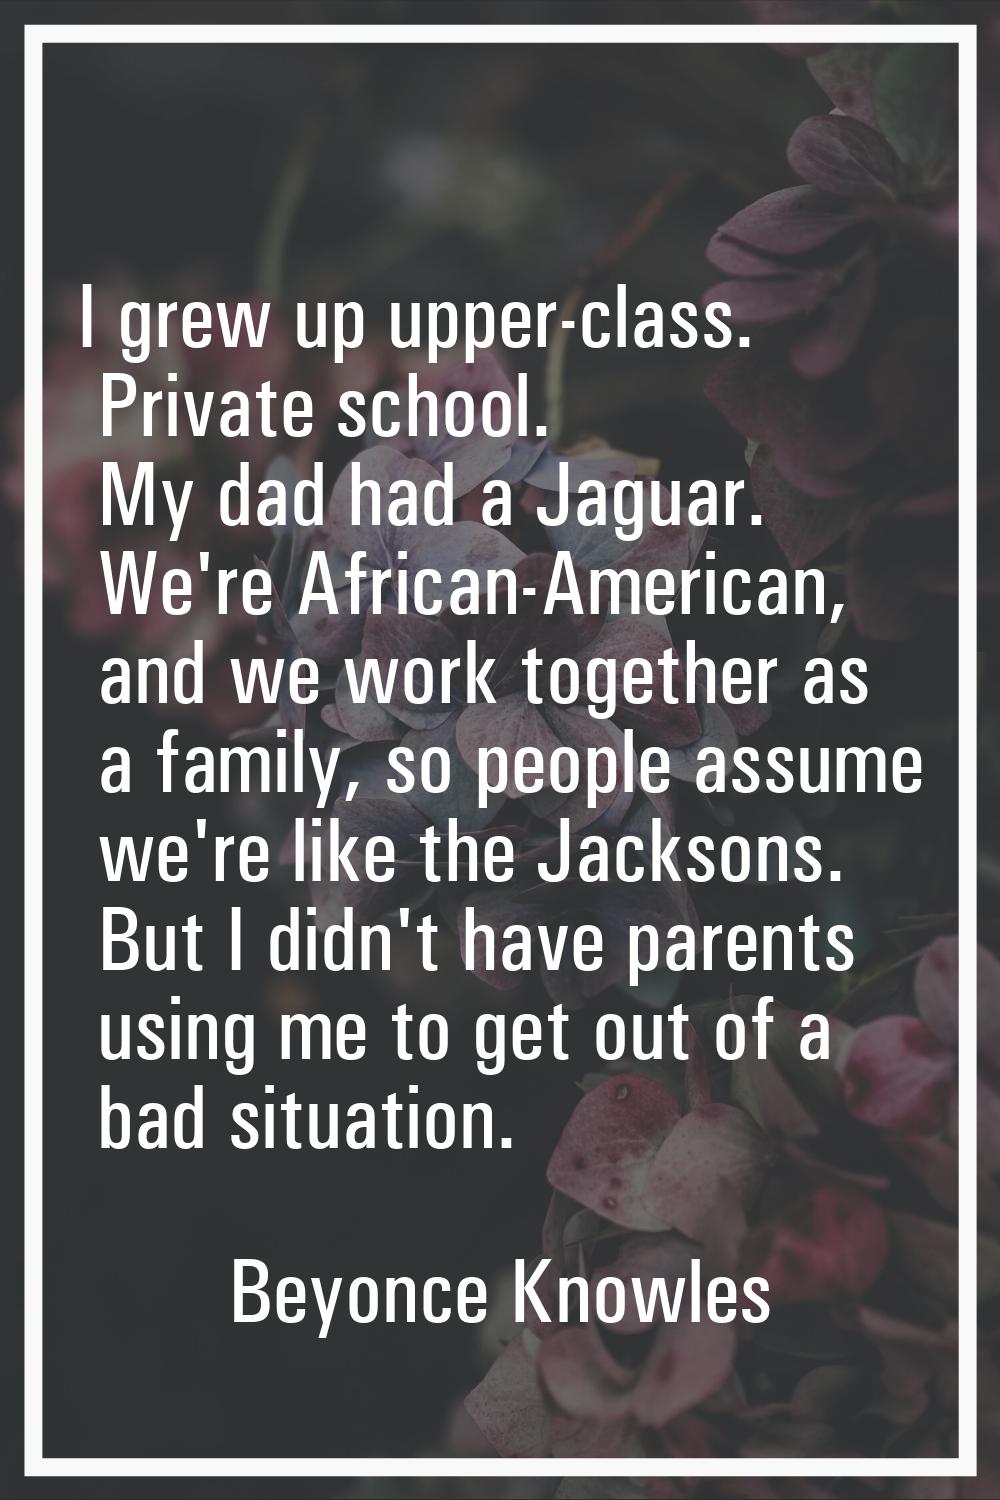 I grew up upper-class. Private school. My dad had a Jaguar. We're African-American, and we work tog